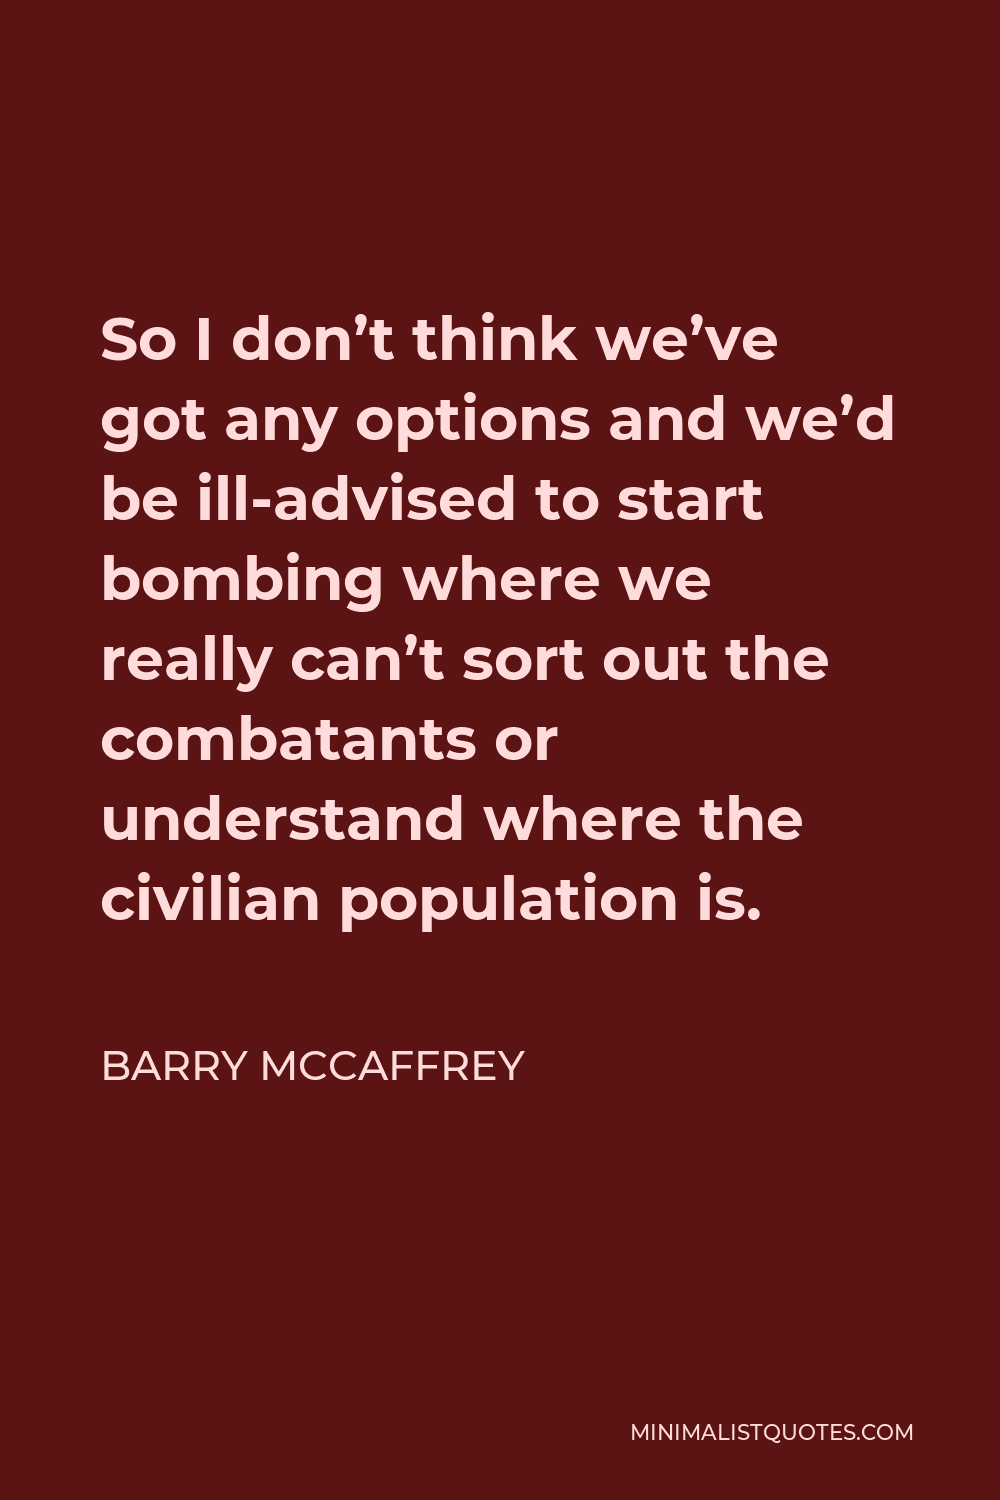 Barry McCaffrey Quote - So I don’t think we’ve got any options and we’d be ill-advised to start bombing where we really can’t sort out the combatants or understand where the civilian population is.